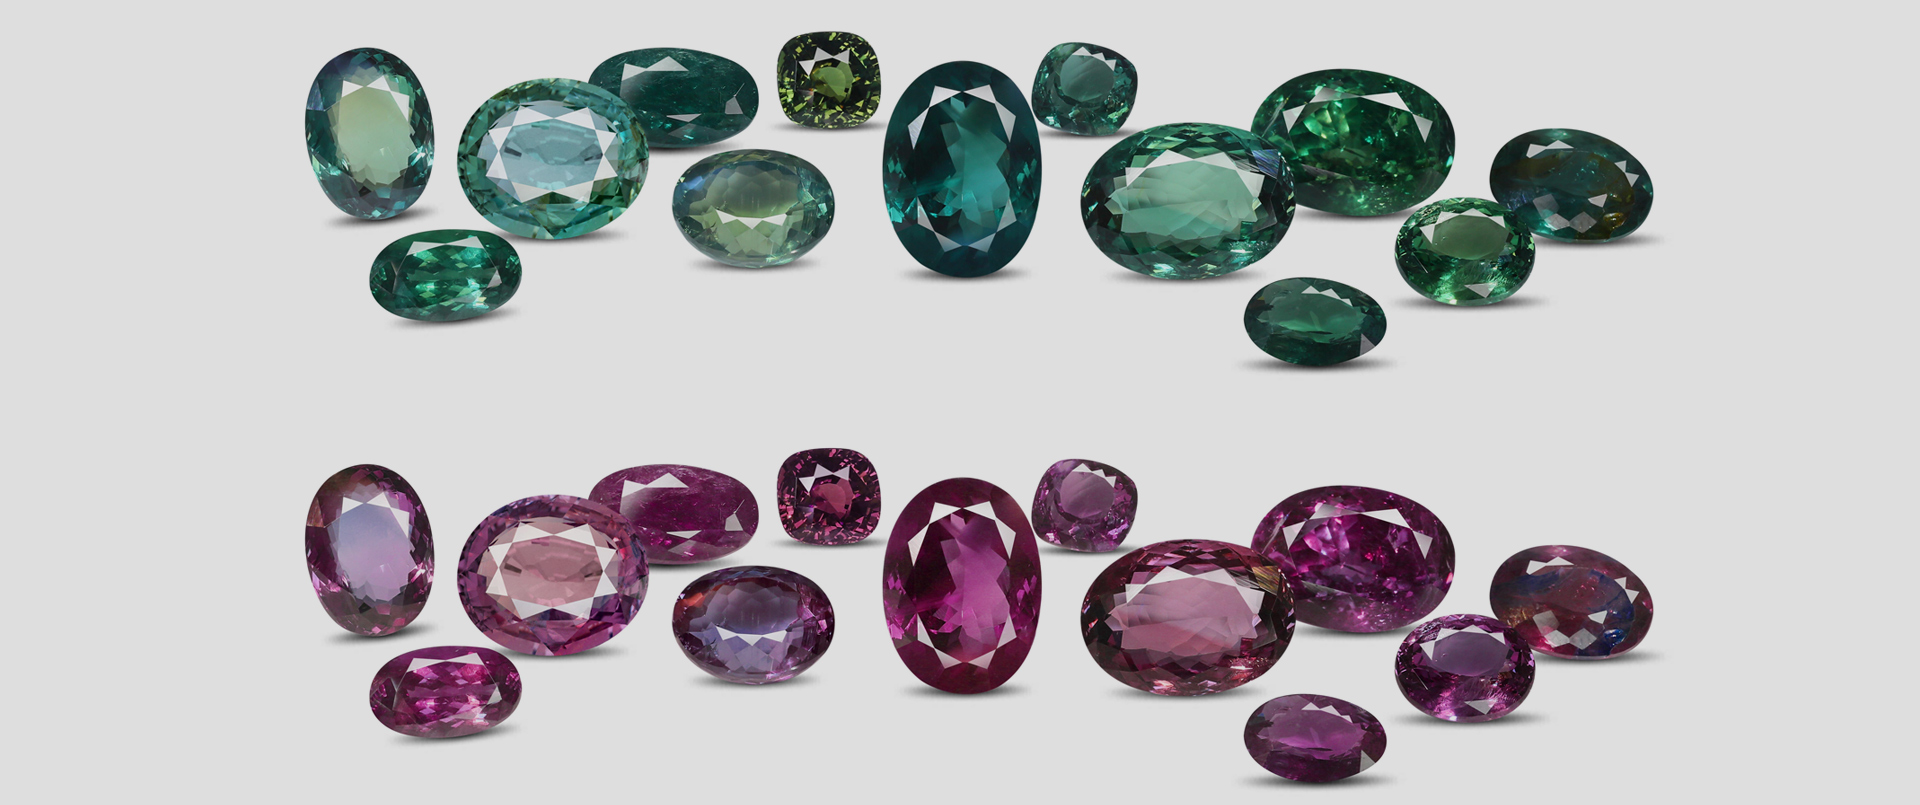 Discover the Elegance of Alexandrite Jewelry at MJ and Gems - Your Alexandrite Specialist